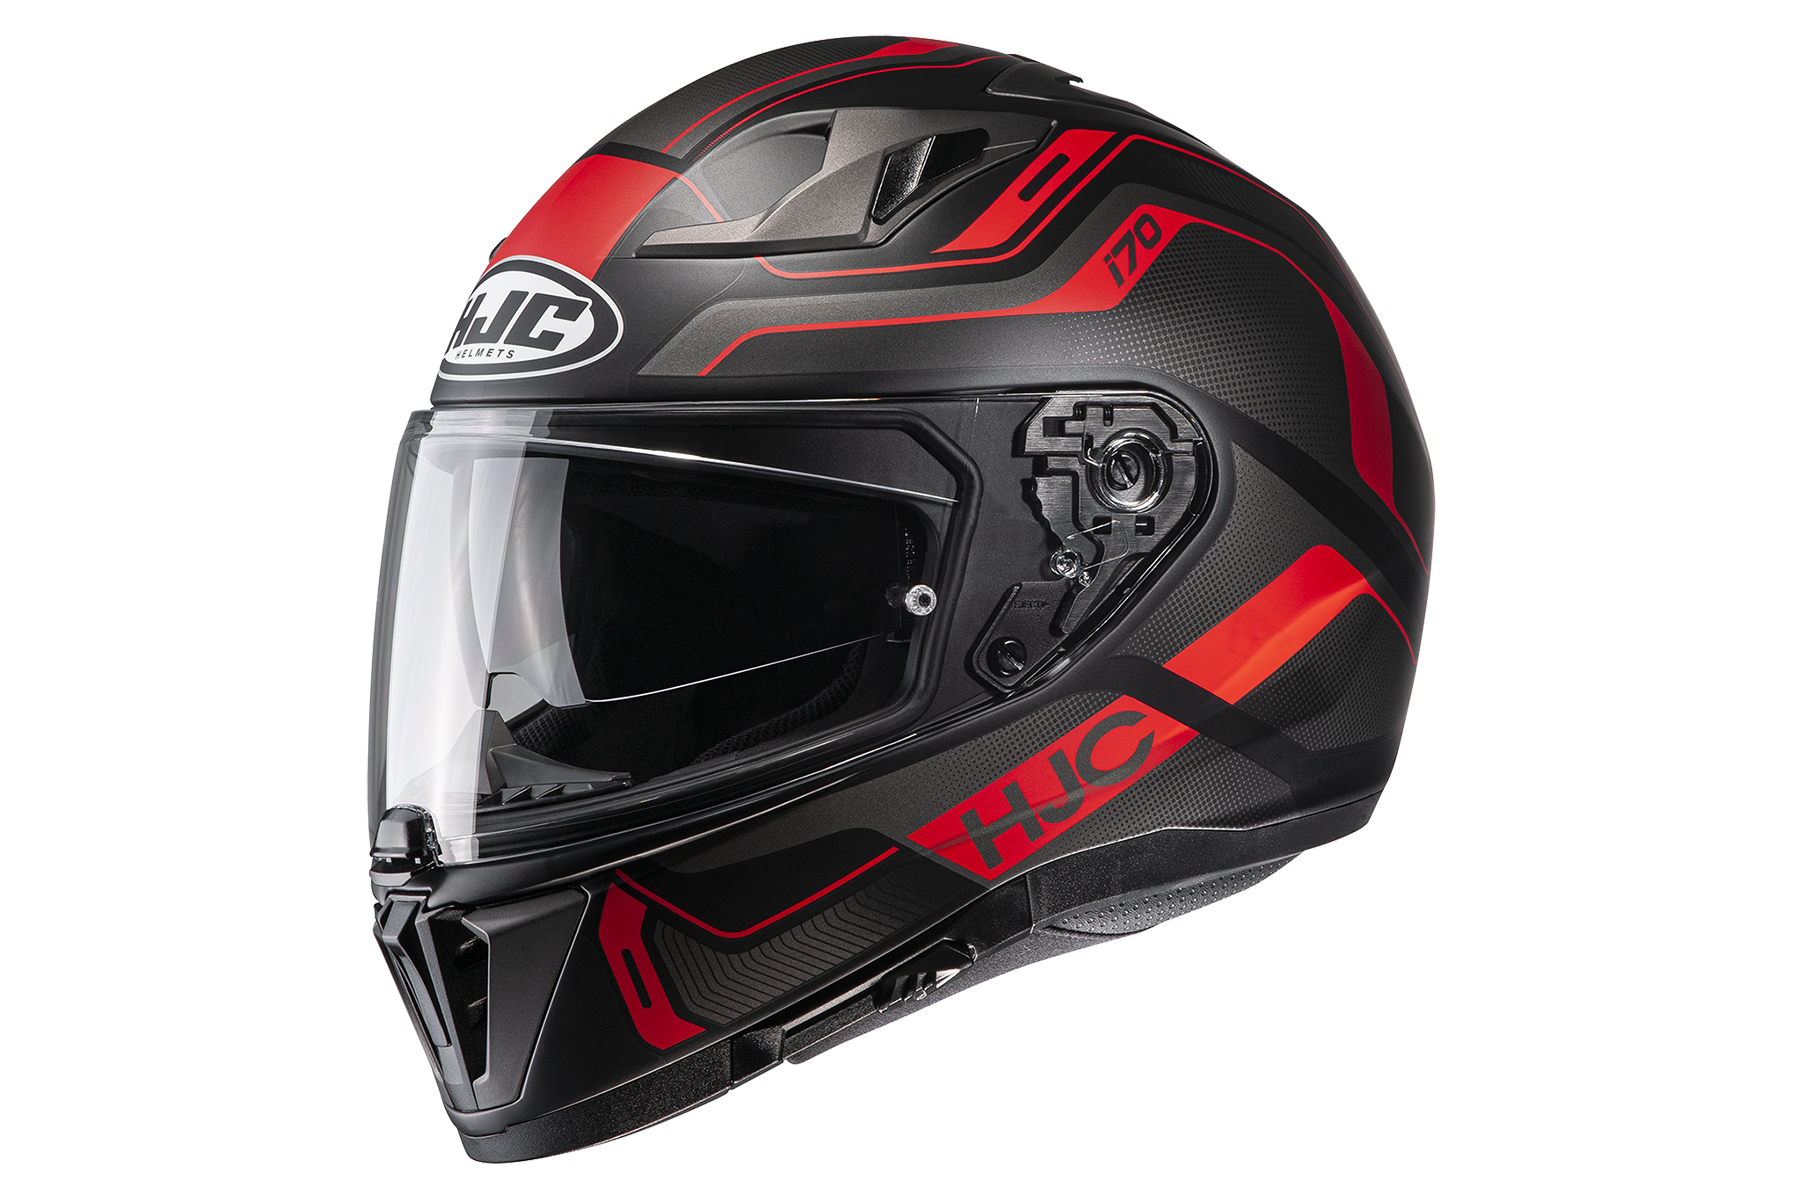 Motorcycle helmet from HJC in red and black